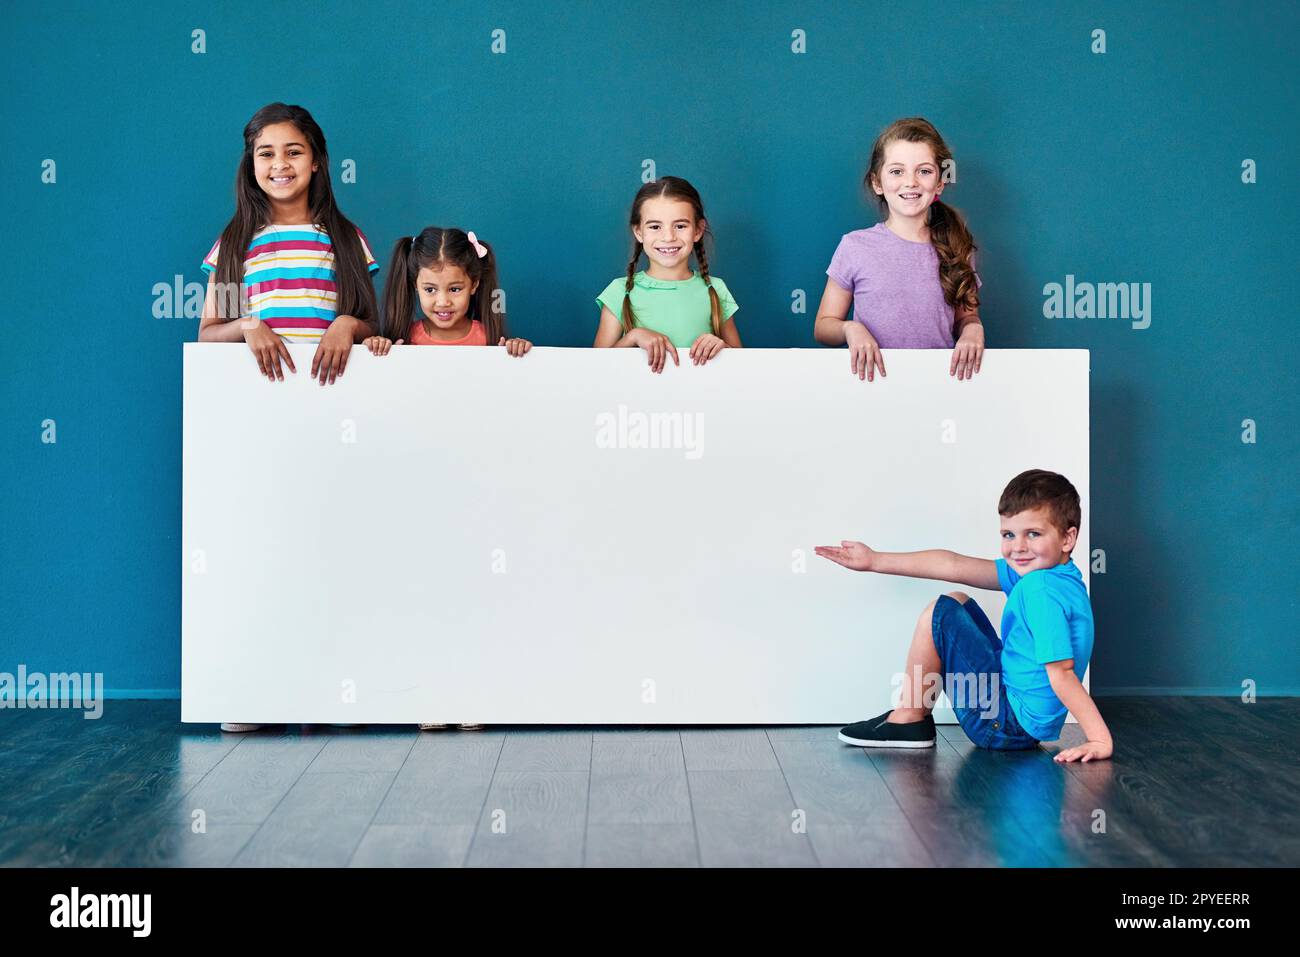 We love it And other kids will too. Studio portrait of a diverse group of kids standing behind a large blank banner against a blue background. Stock Photo